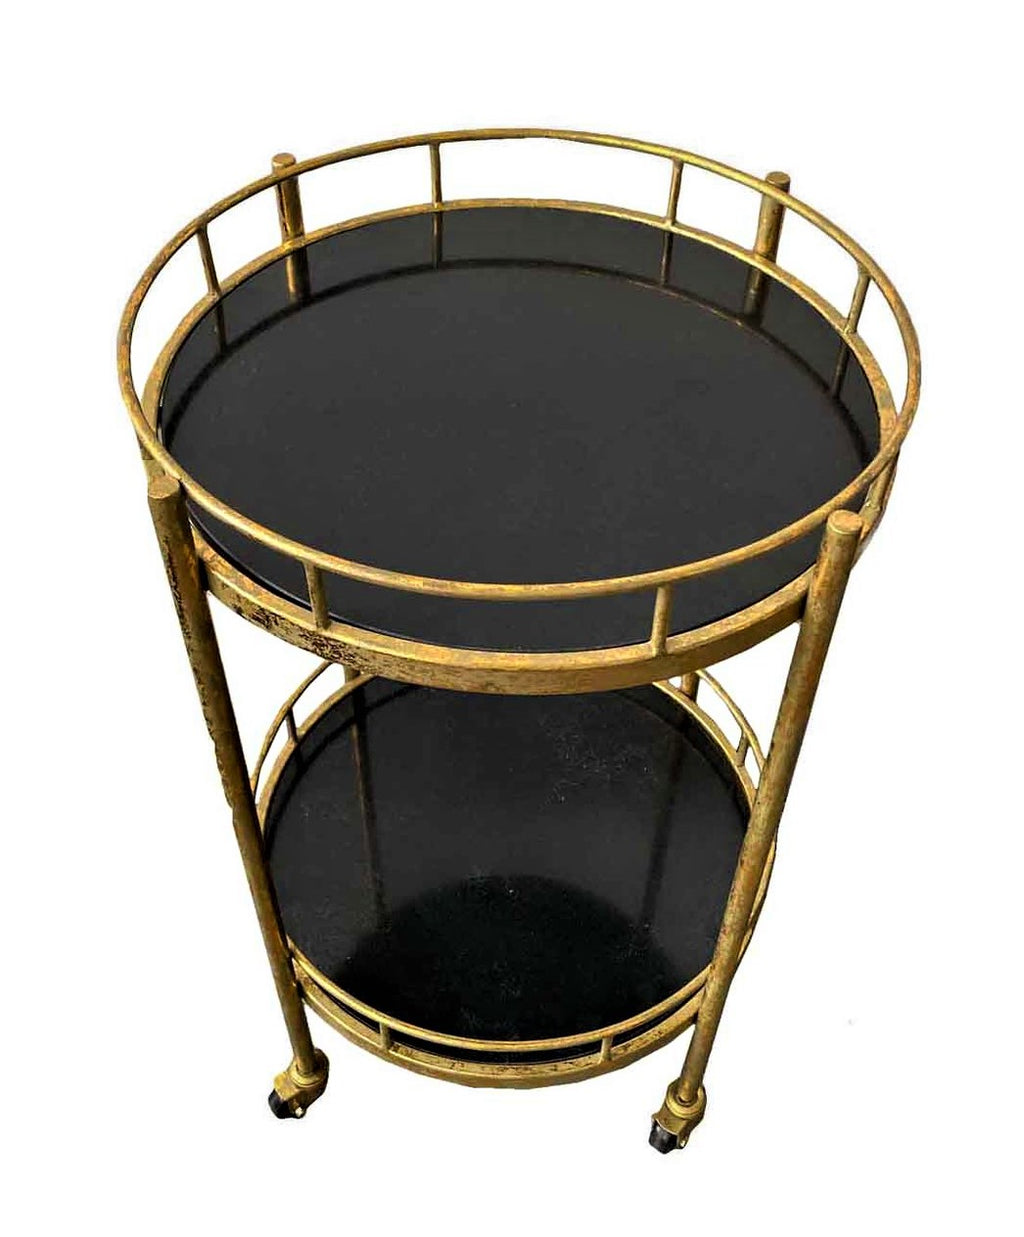 Drinks trolley with two tray levels and casters. Black trays with gold coloured edging.